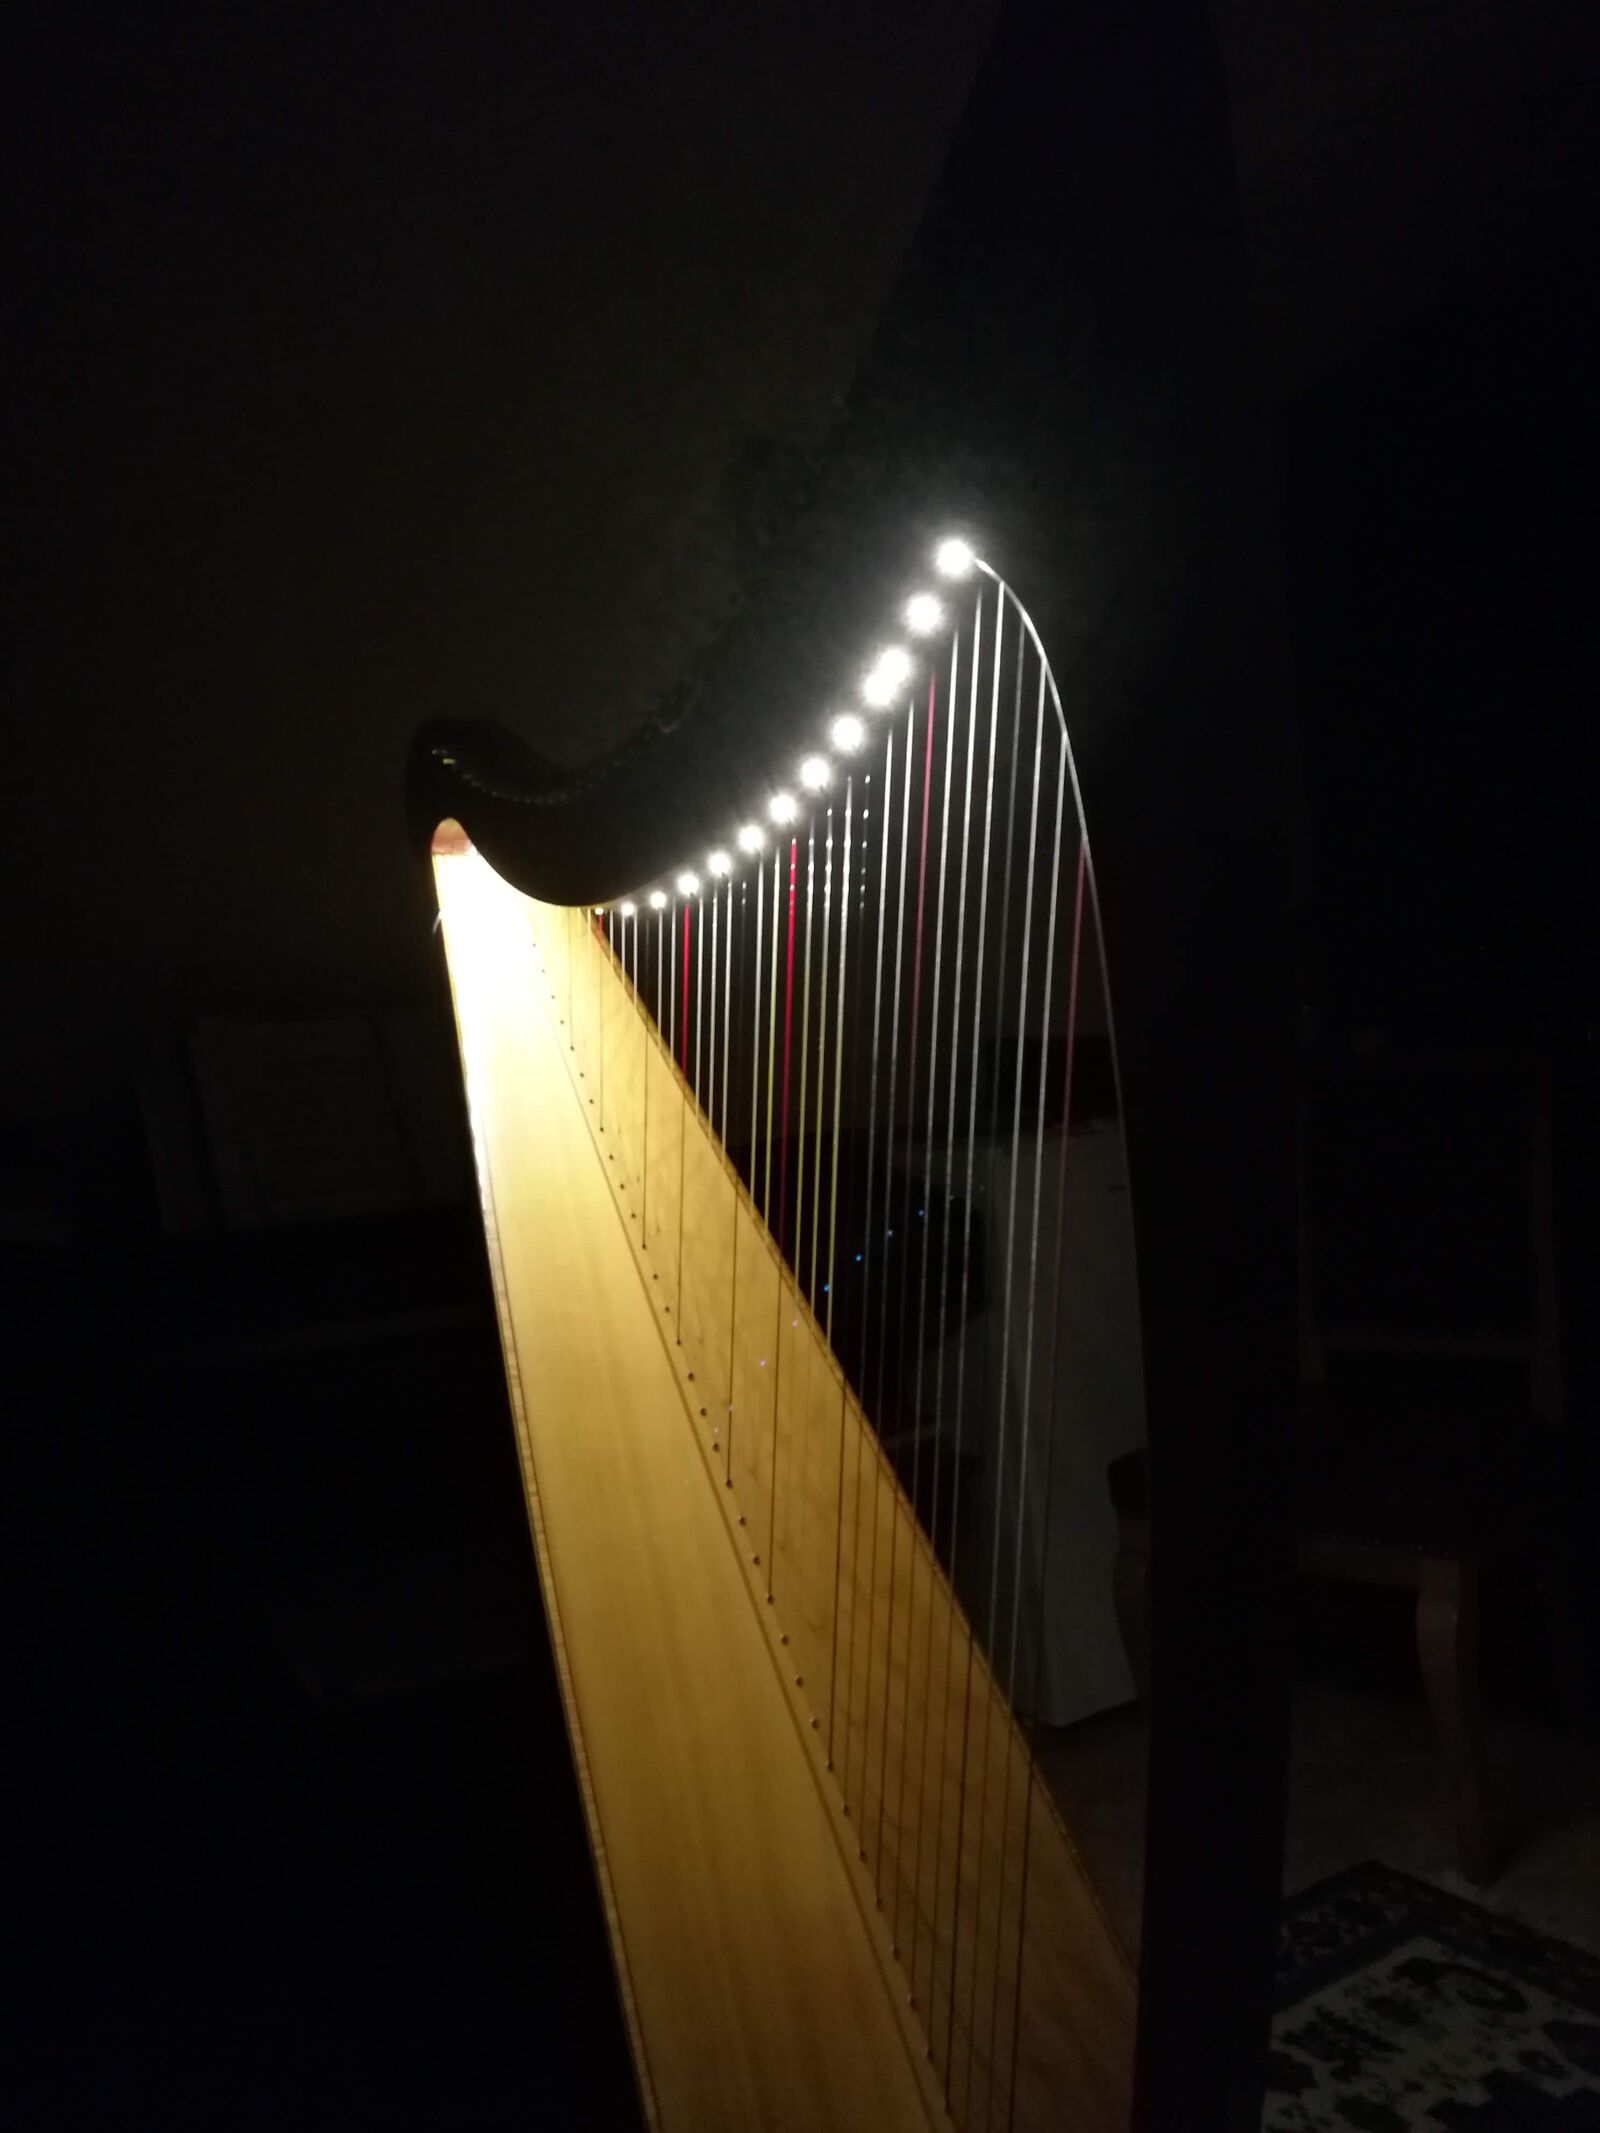 HUAWEI Honor 8 sample photo. Harp, in the evening photography